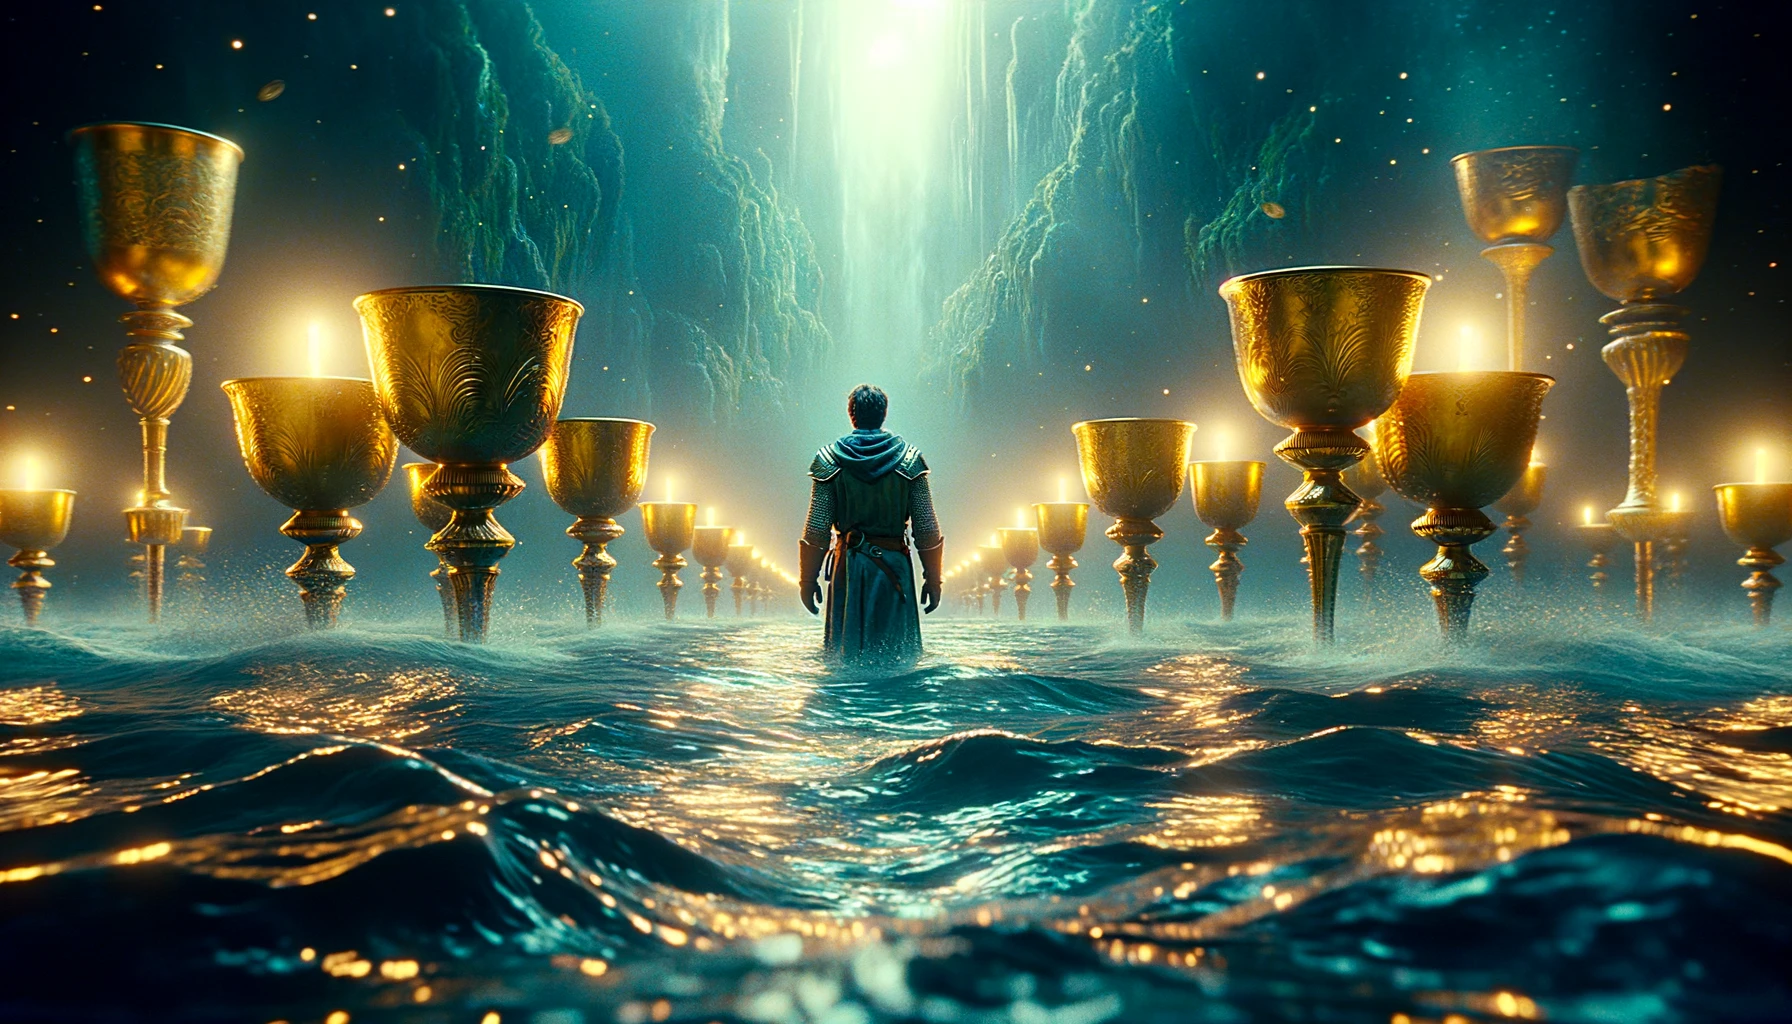 An image showcasing a solitary knight standing amidst a lush dreamlike ocean as golden cups emerge from the water symbolizing the introspective jour